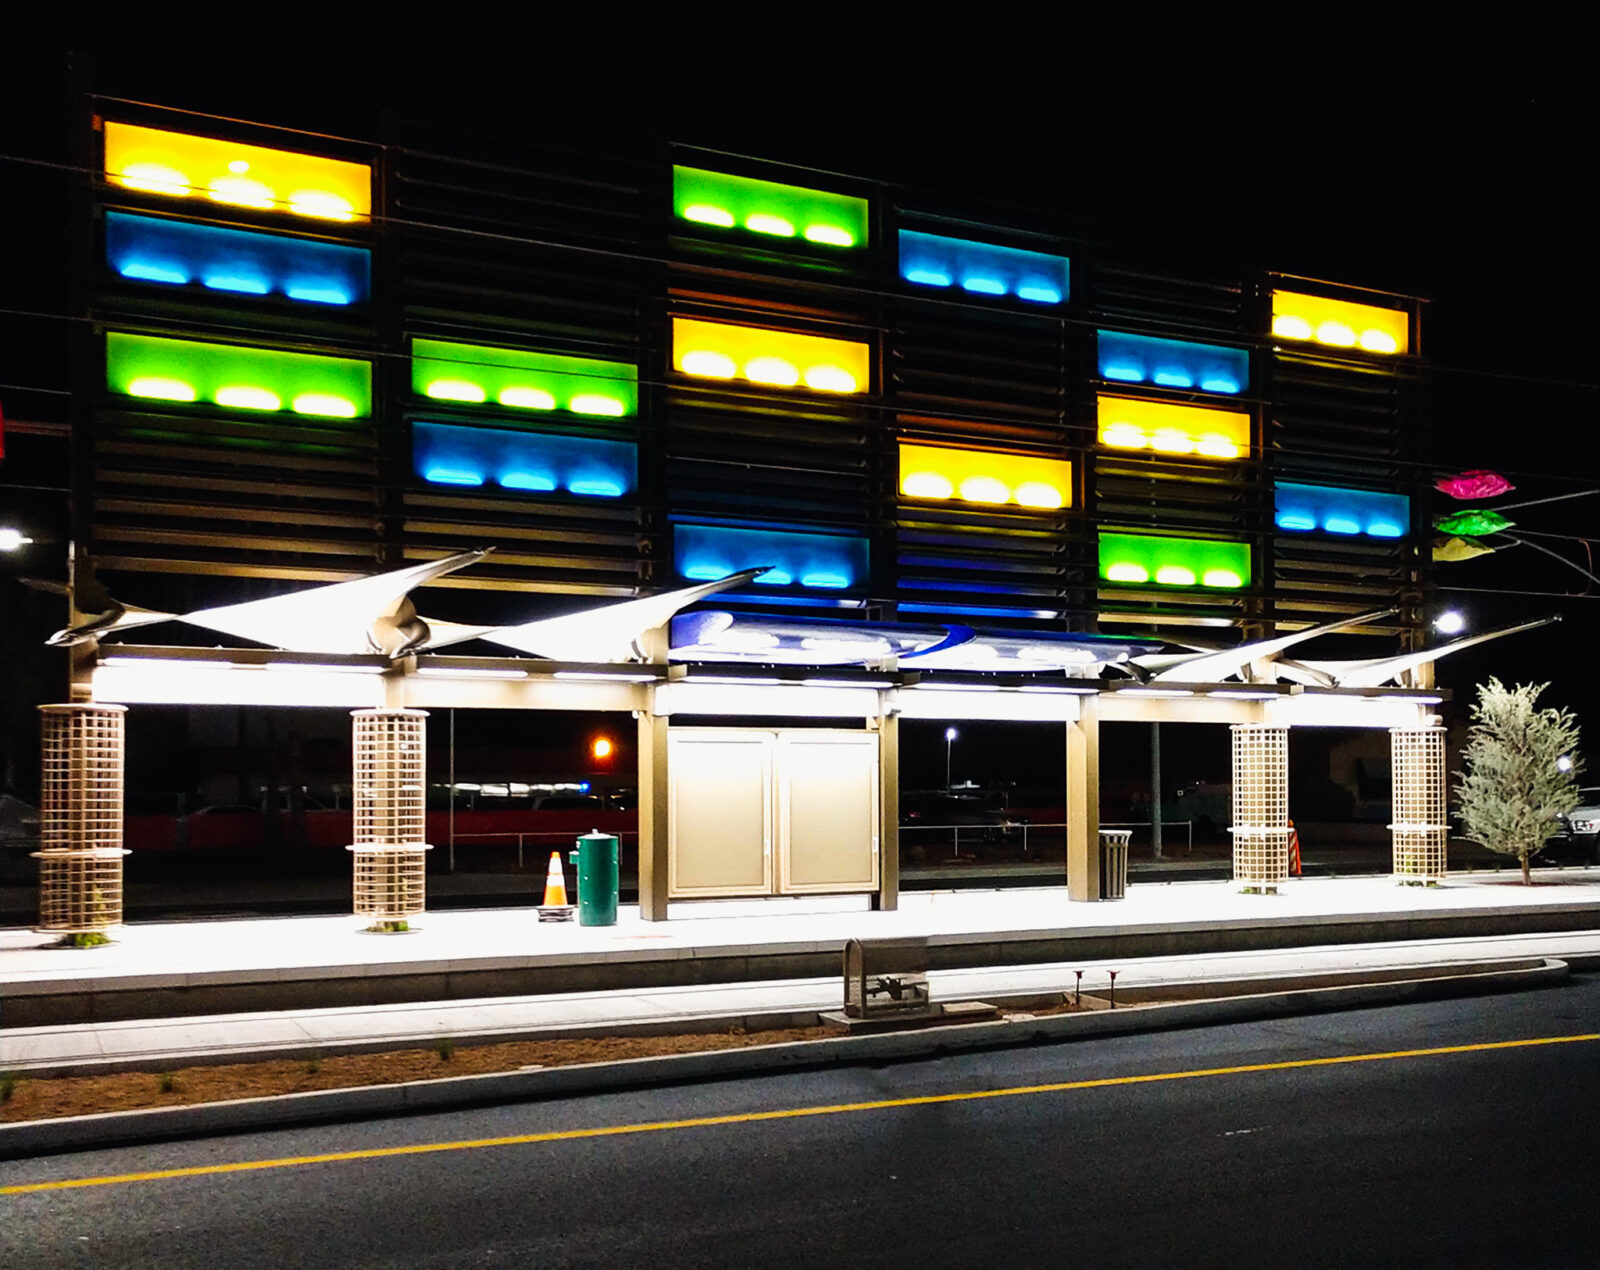 Railway station with multi-colored lights